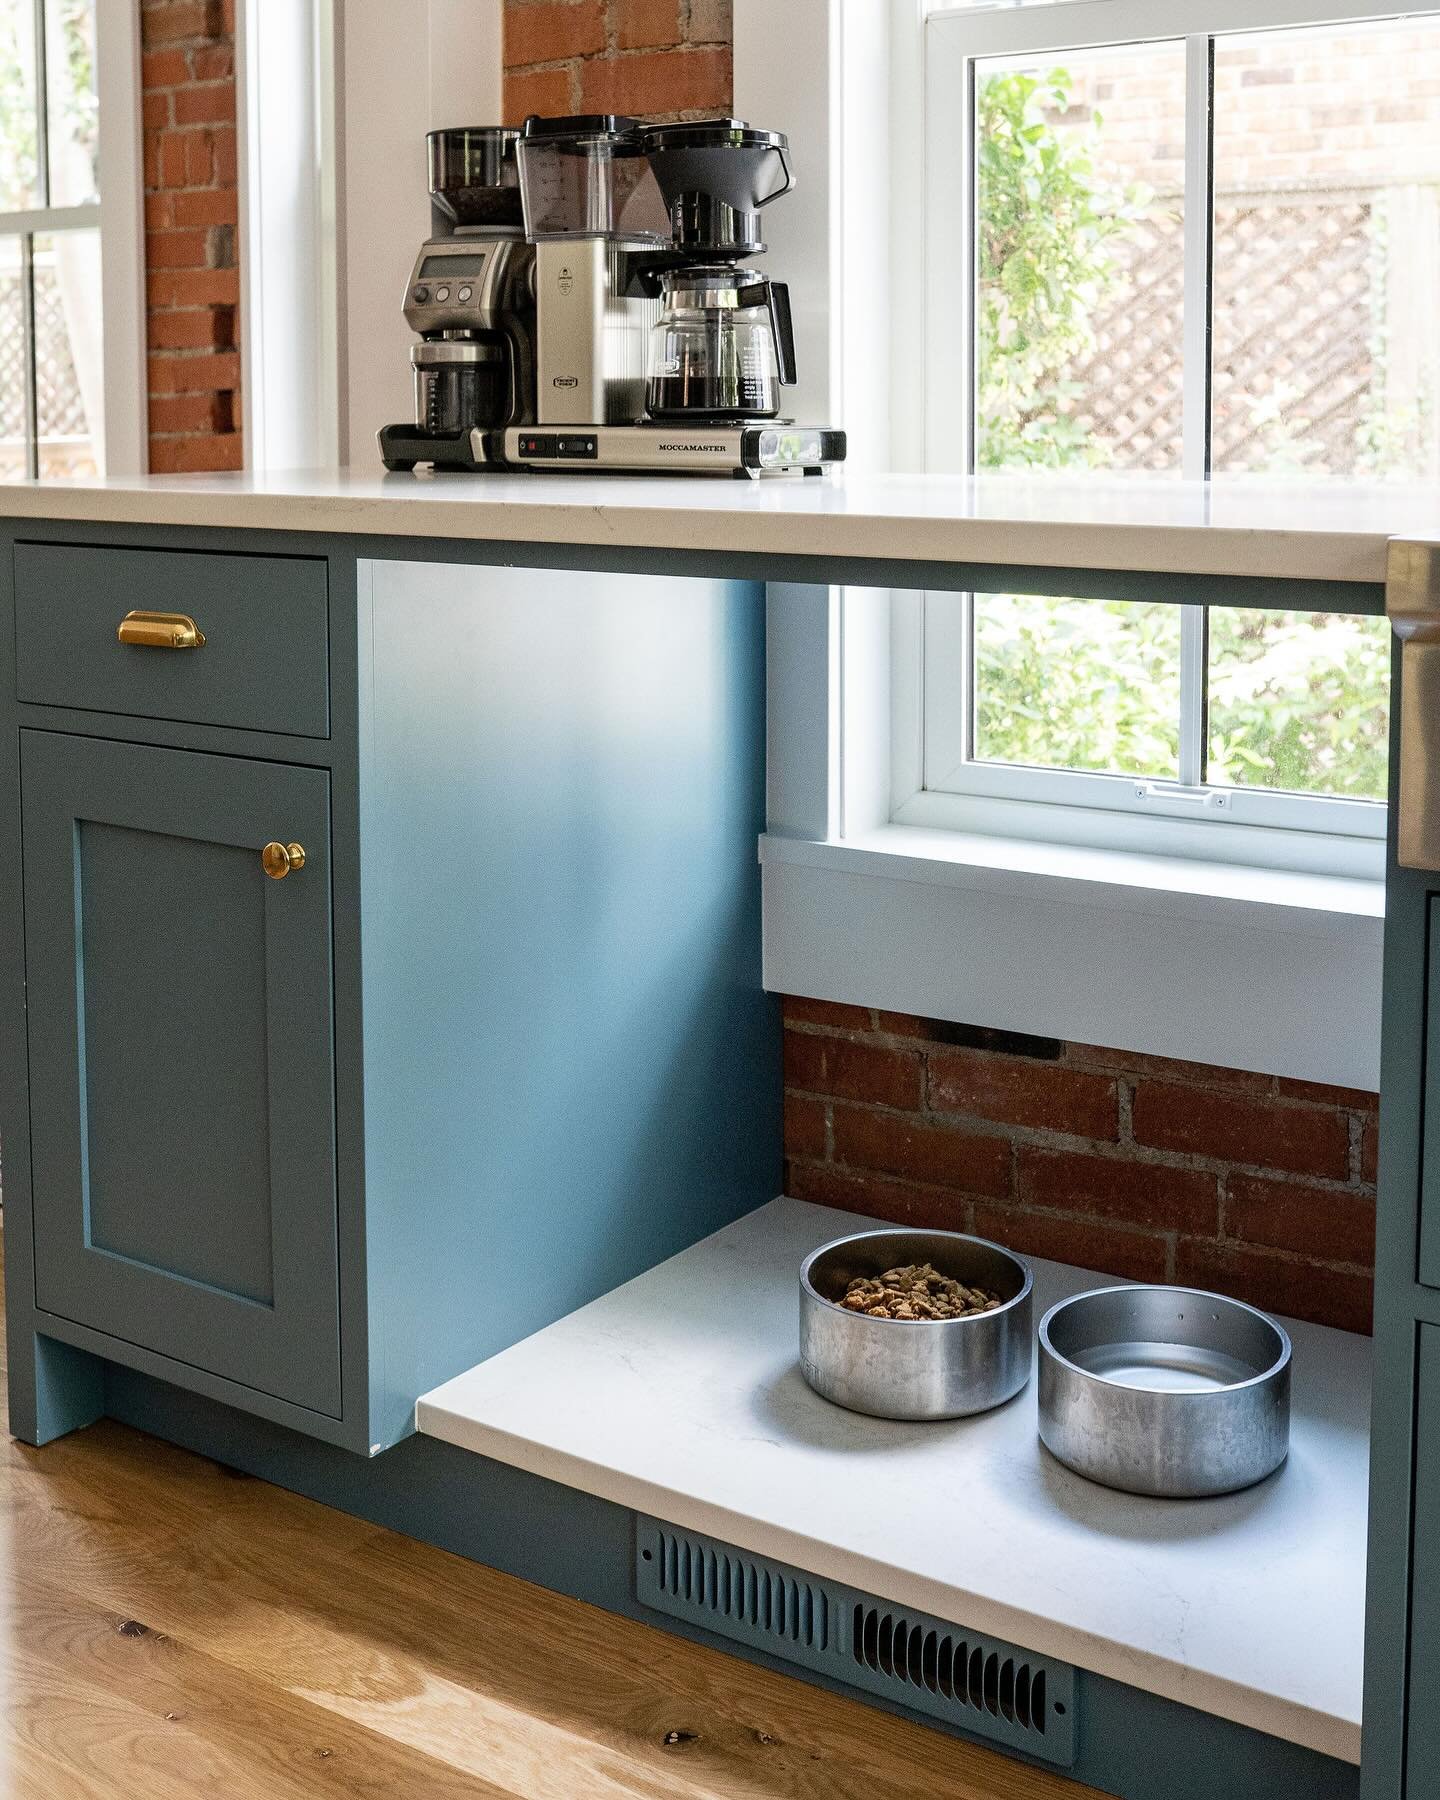 Designing with dogs in mind! We had a low window in the kitchen and wanted to span the countertop across to have more prep space. We decided this was the perfect spot to put in a countertop for the client&rsquo;s sweet pup to have her meals!
&bull;
P